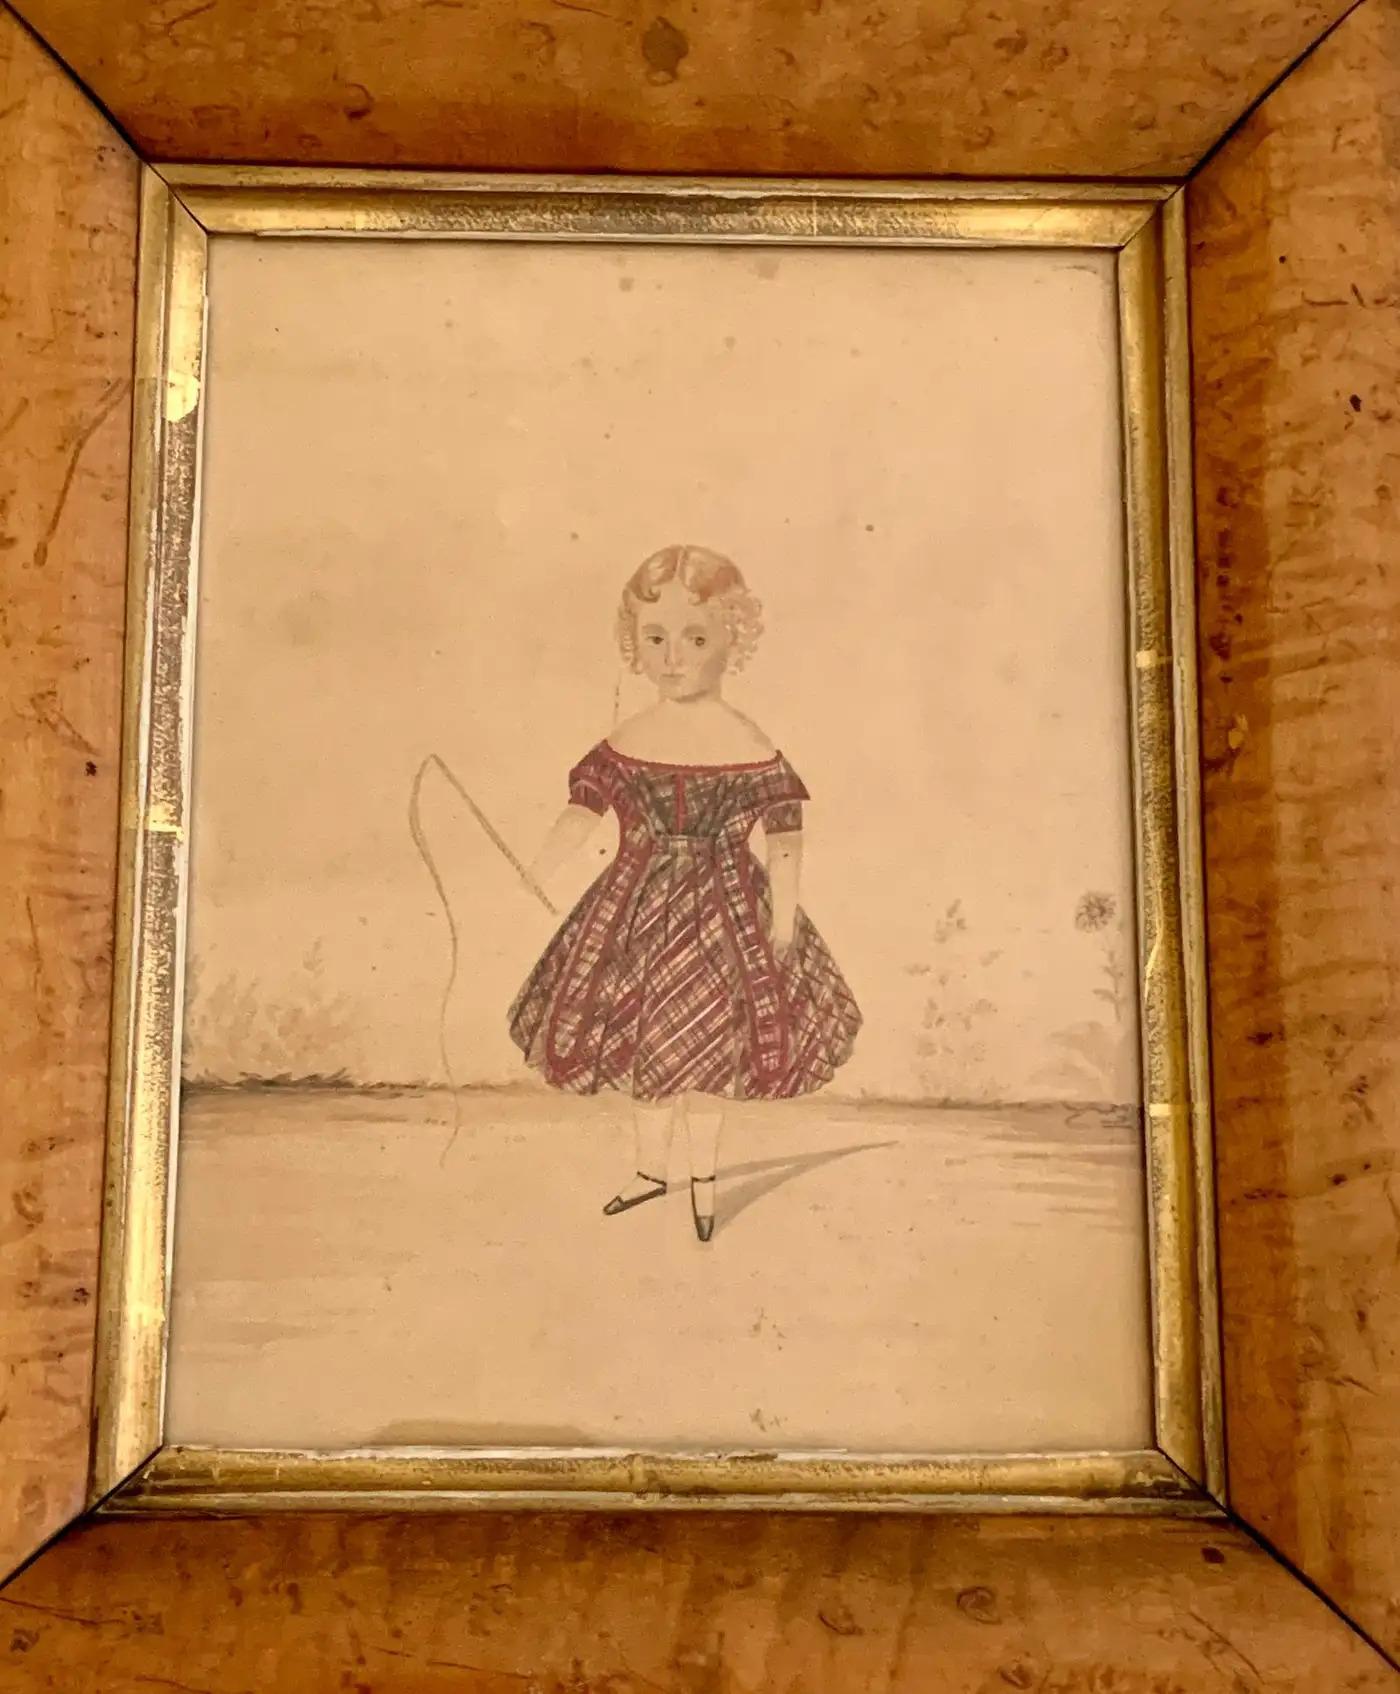 A small, mid-19th-century English School watercolor portrait of a young girl with her hair in perfect curls and wearing a plaid dress. 
She has a serious look appropriate for standing still while this important portrait is painted.
Her expression of